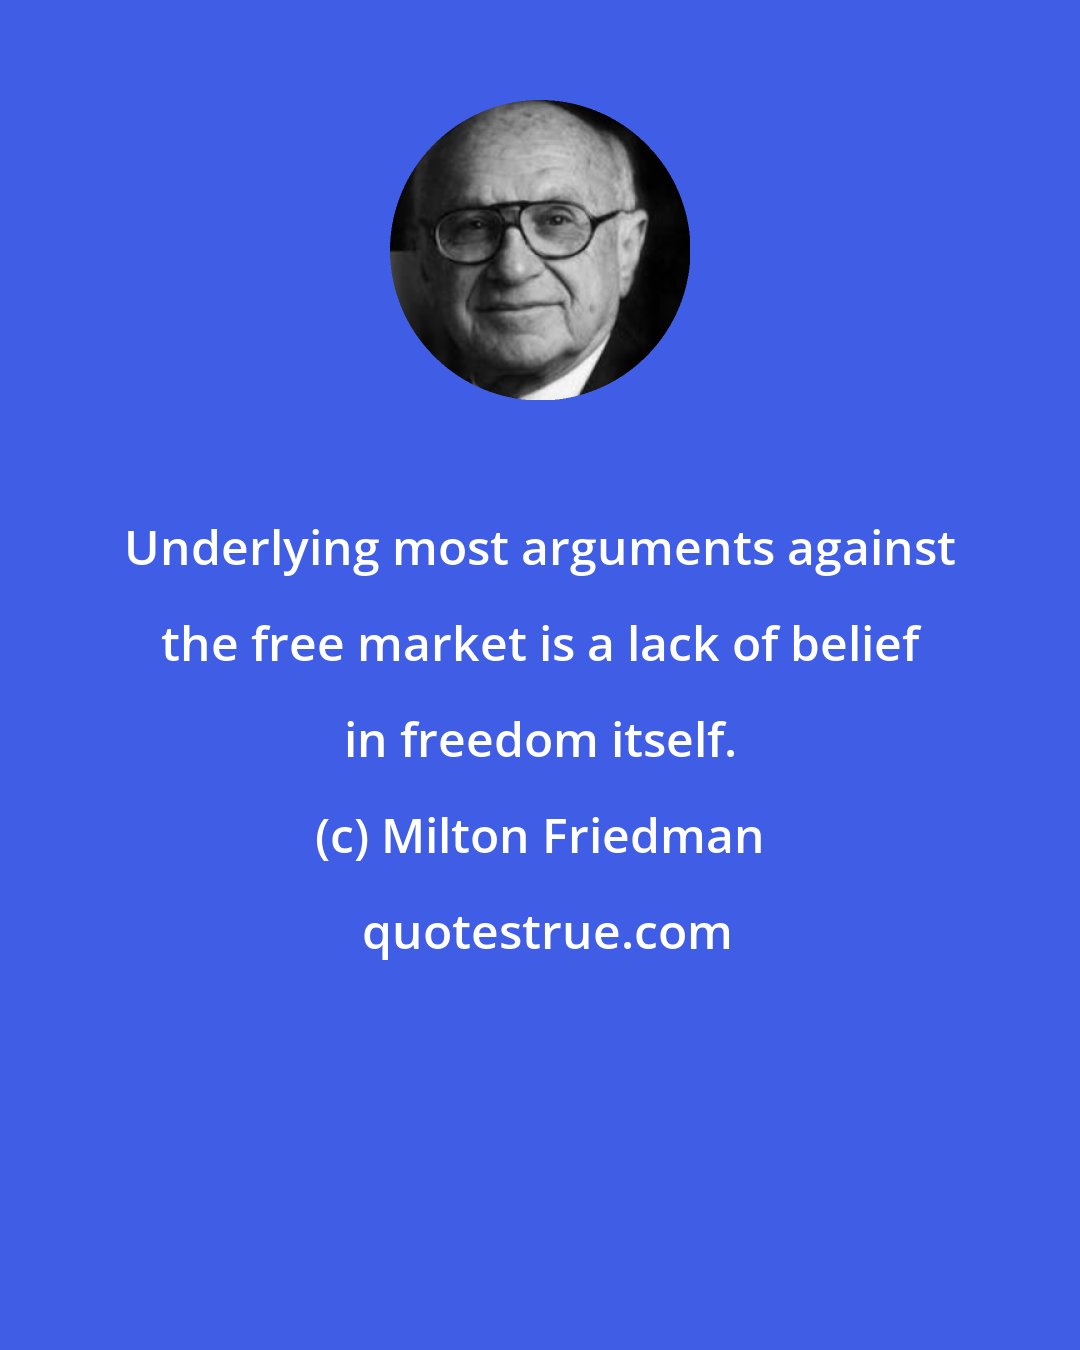 Milton Friedman: Underlying most arguments against the free market is a lack of belief in freedom itself.